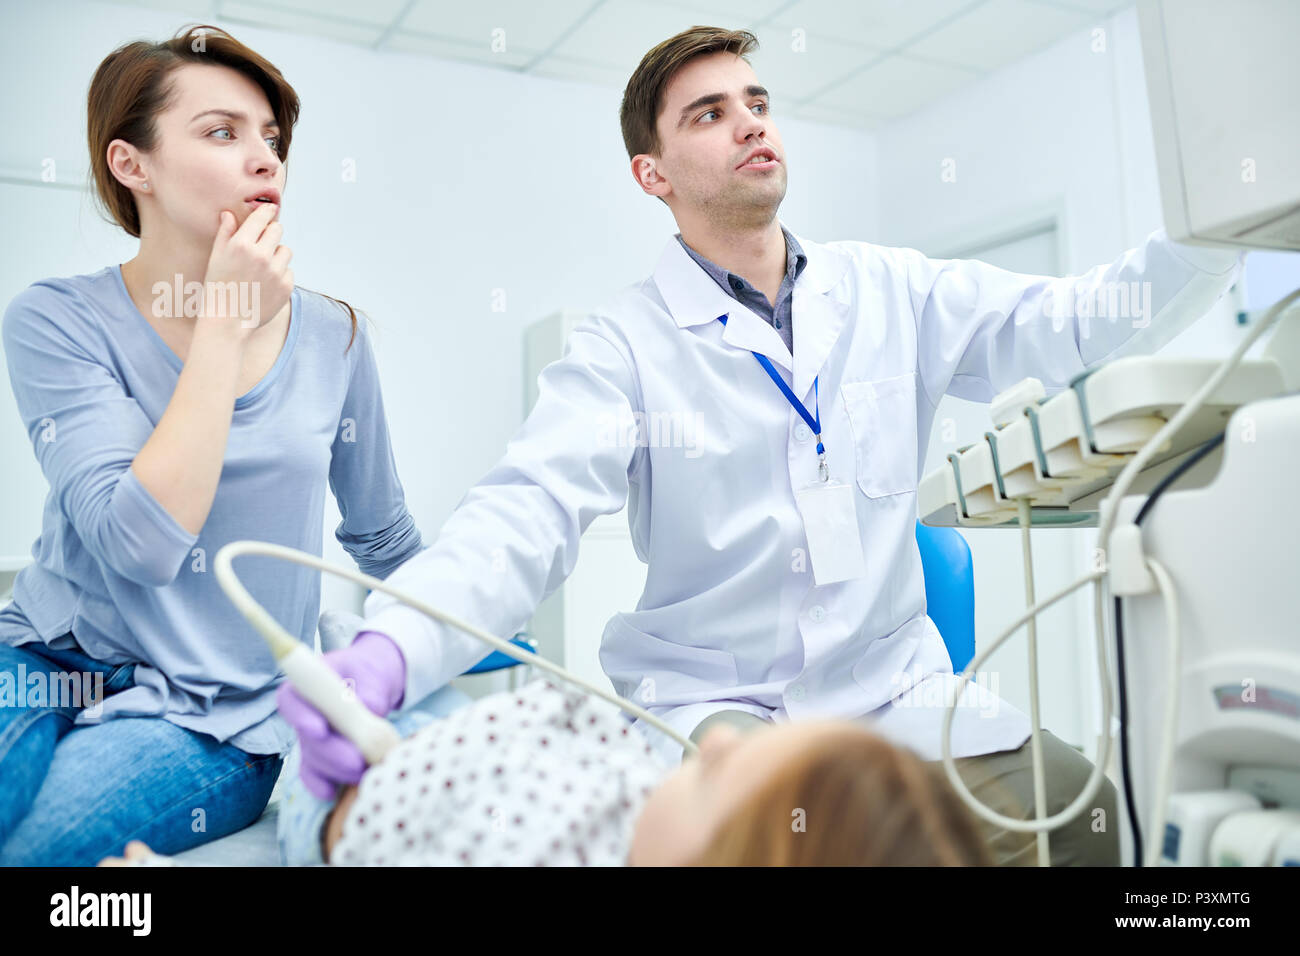 Doctors seriously looking at medical device Stock Photo